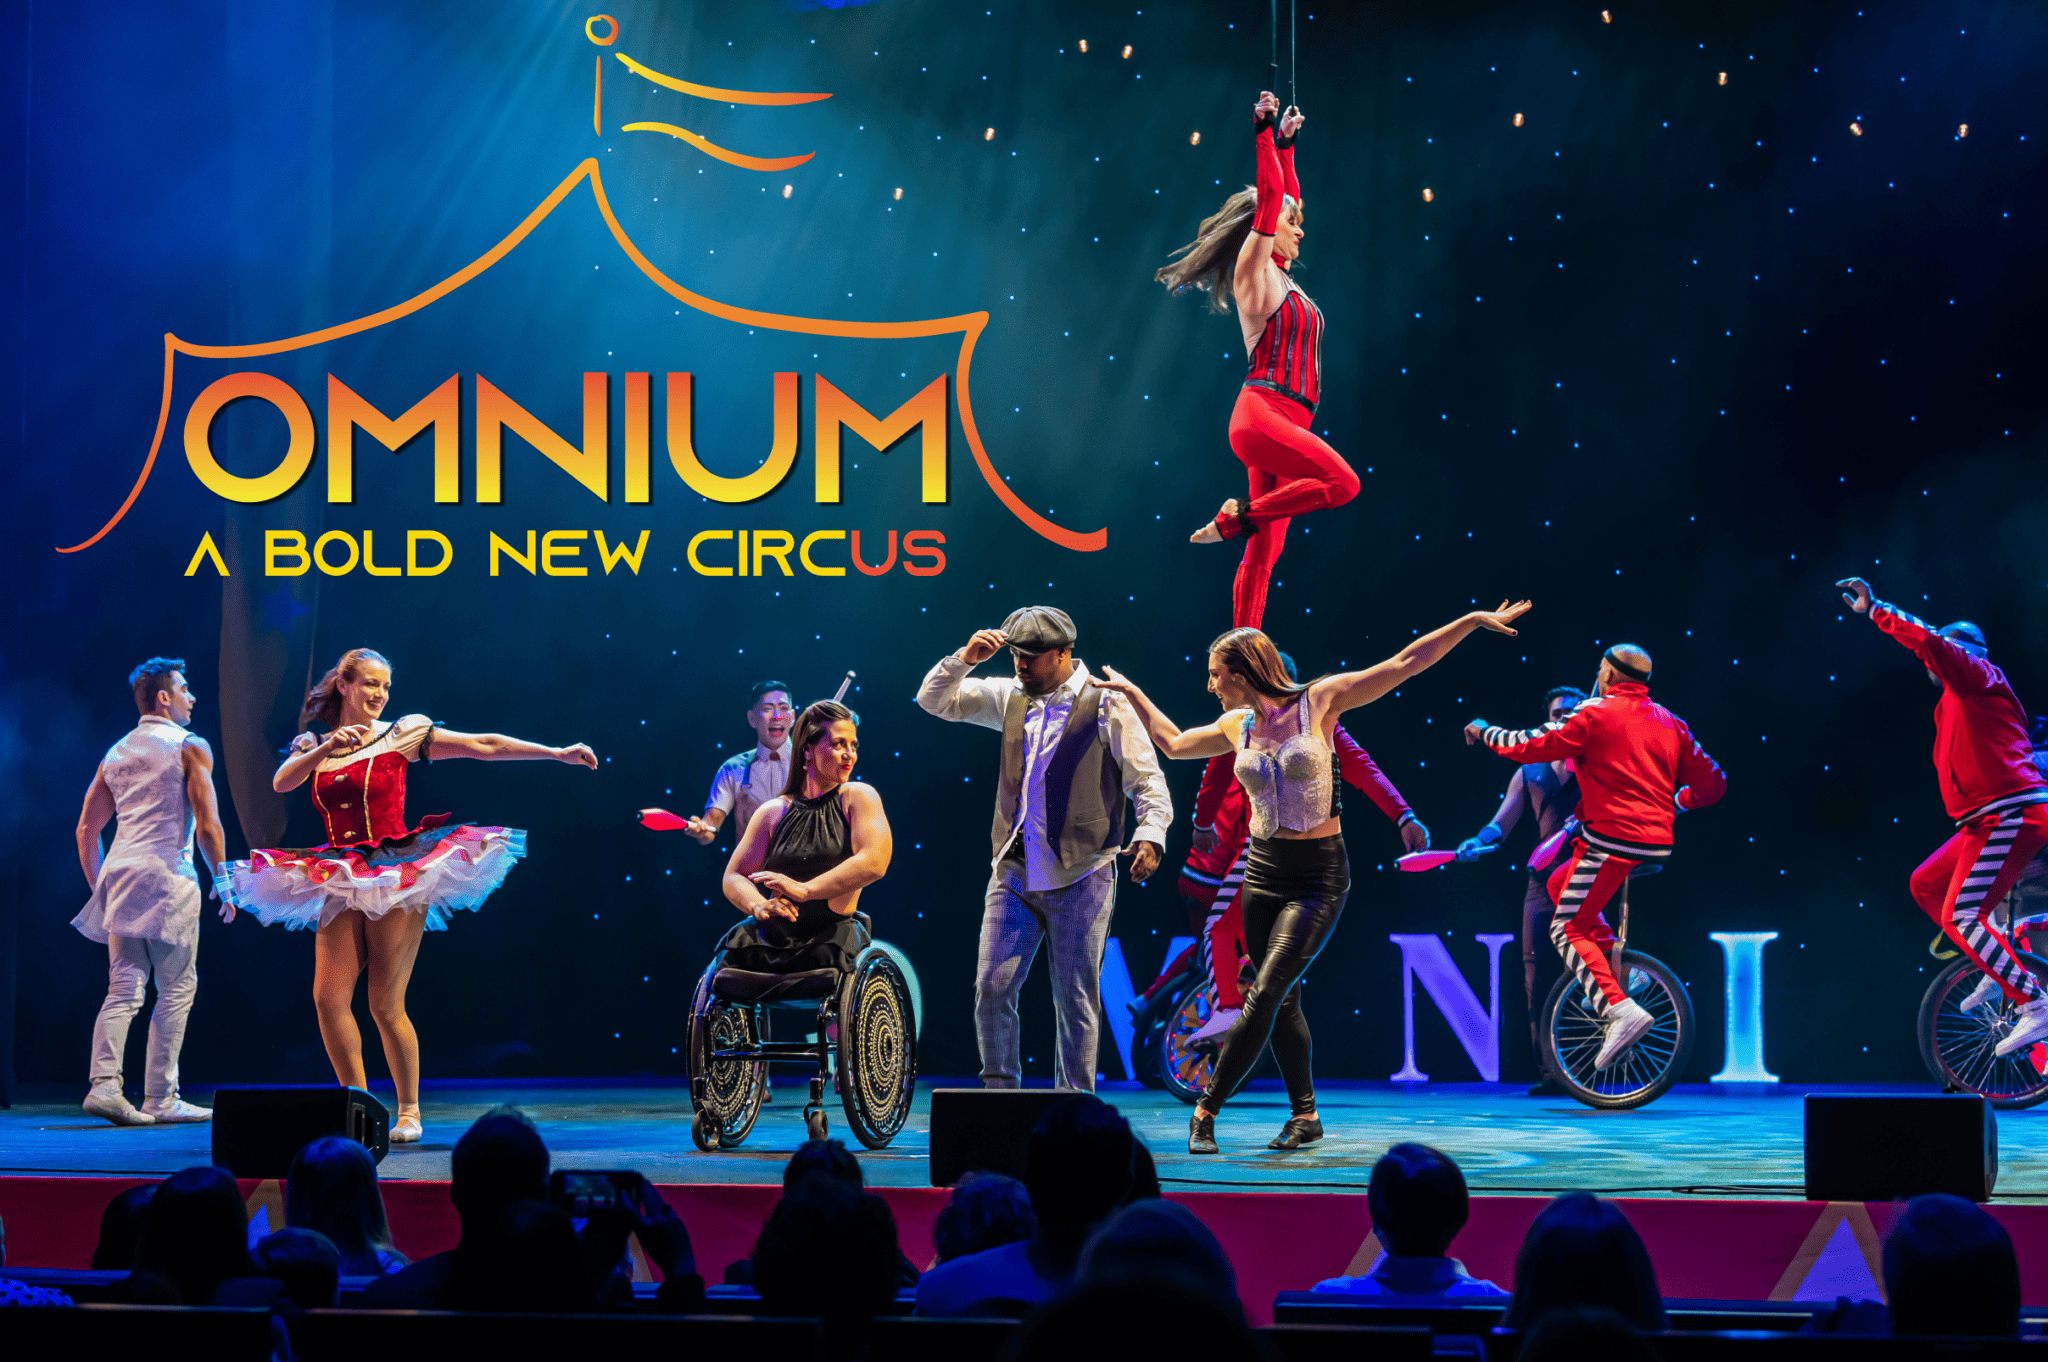 A scene from the opening act of Omnium Circus shows “Johnny” fully immersed in the Circus, standing next to Jen Bricker-Bauer in her wheelchair as multiple dancers dance around them. Vivien hangs in the air while The King Charles Troupe rides their unicycles together in the back. The Omnium Logo is in the top left corner.